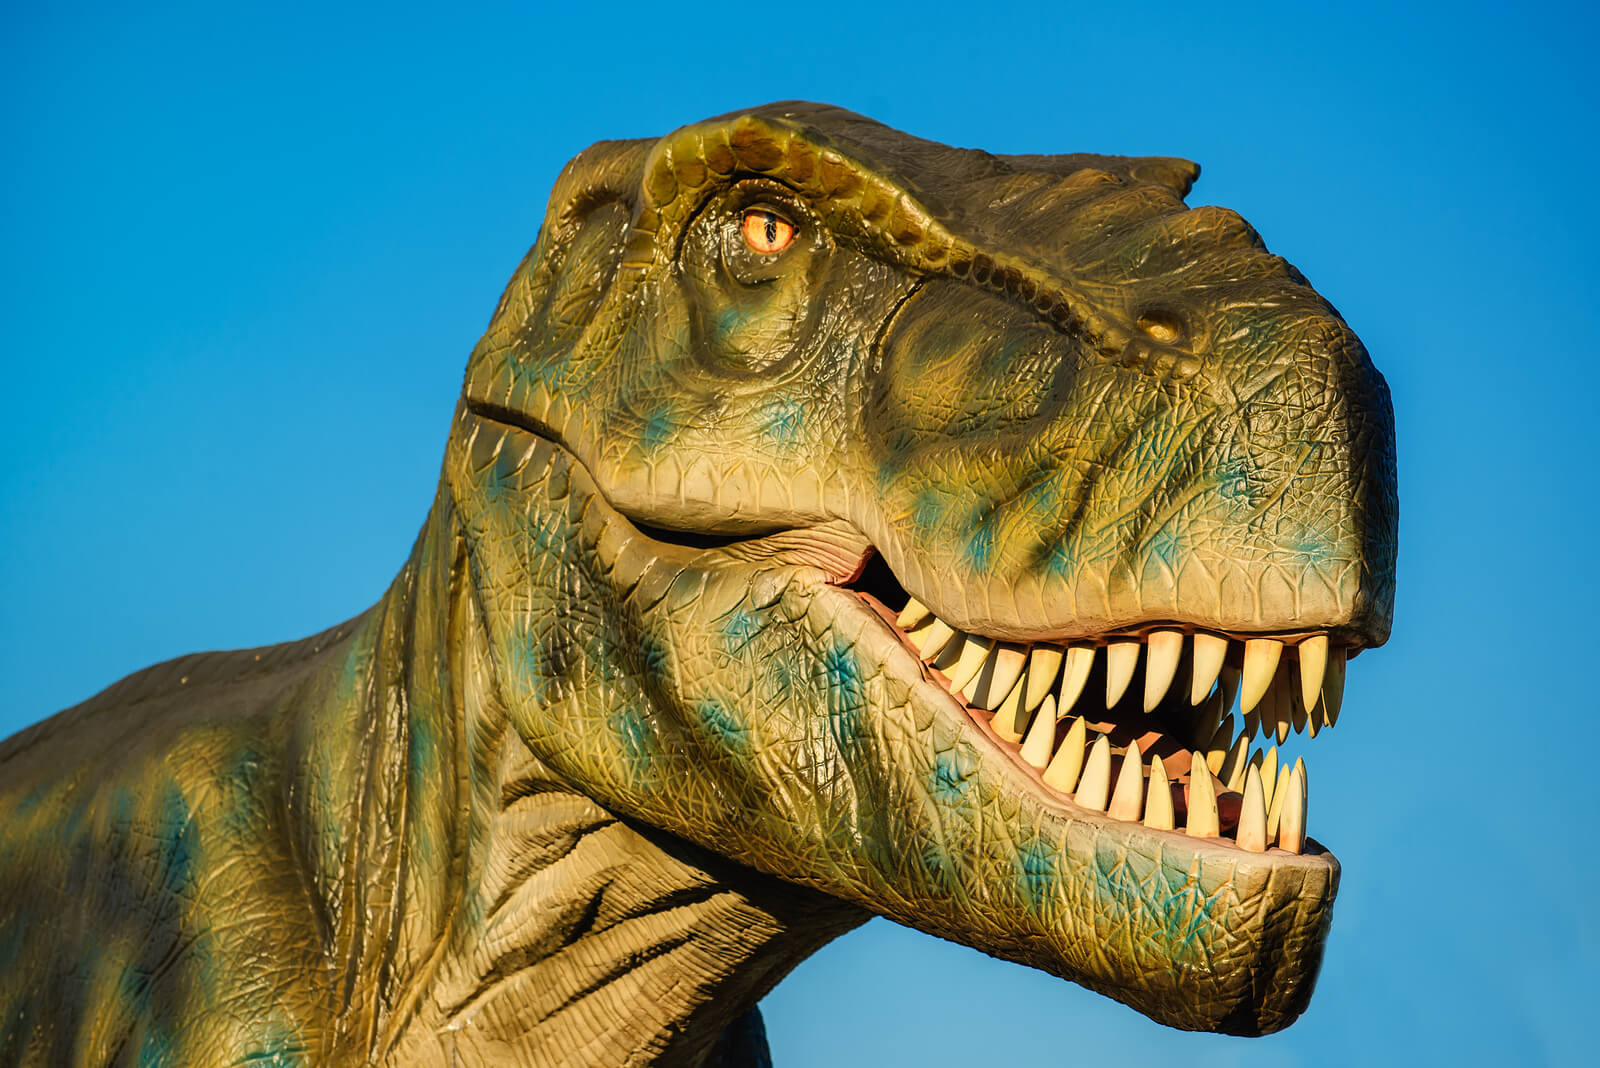 Tyrannosaurus  Dinosaurs - Pictures and Facts